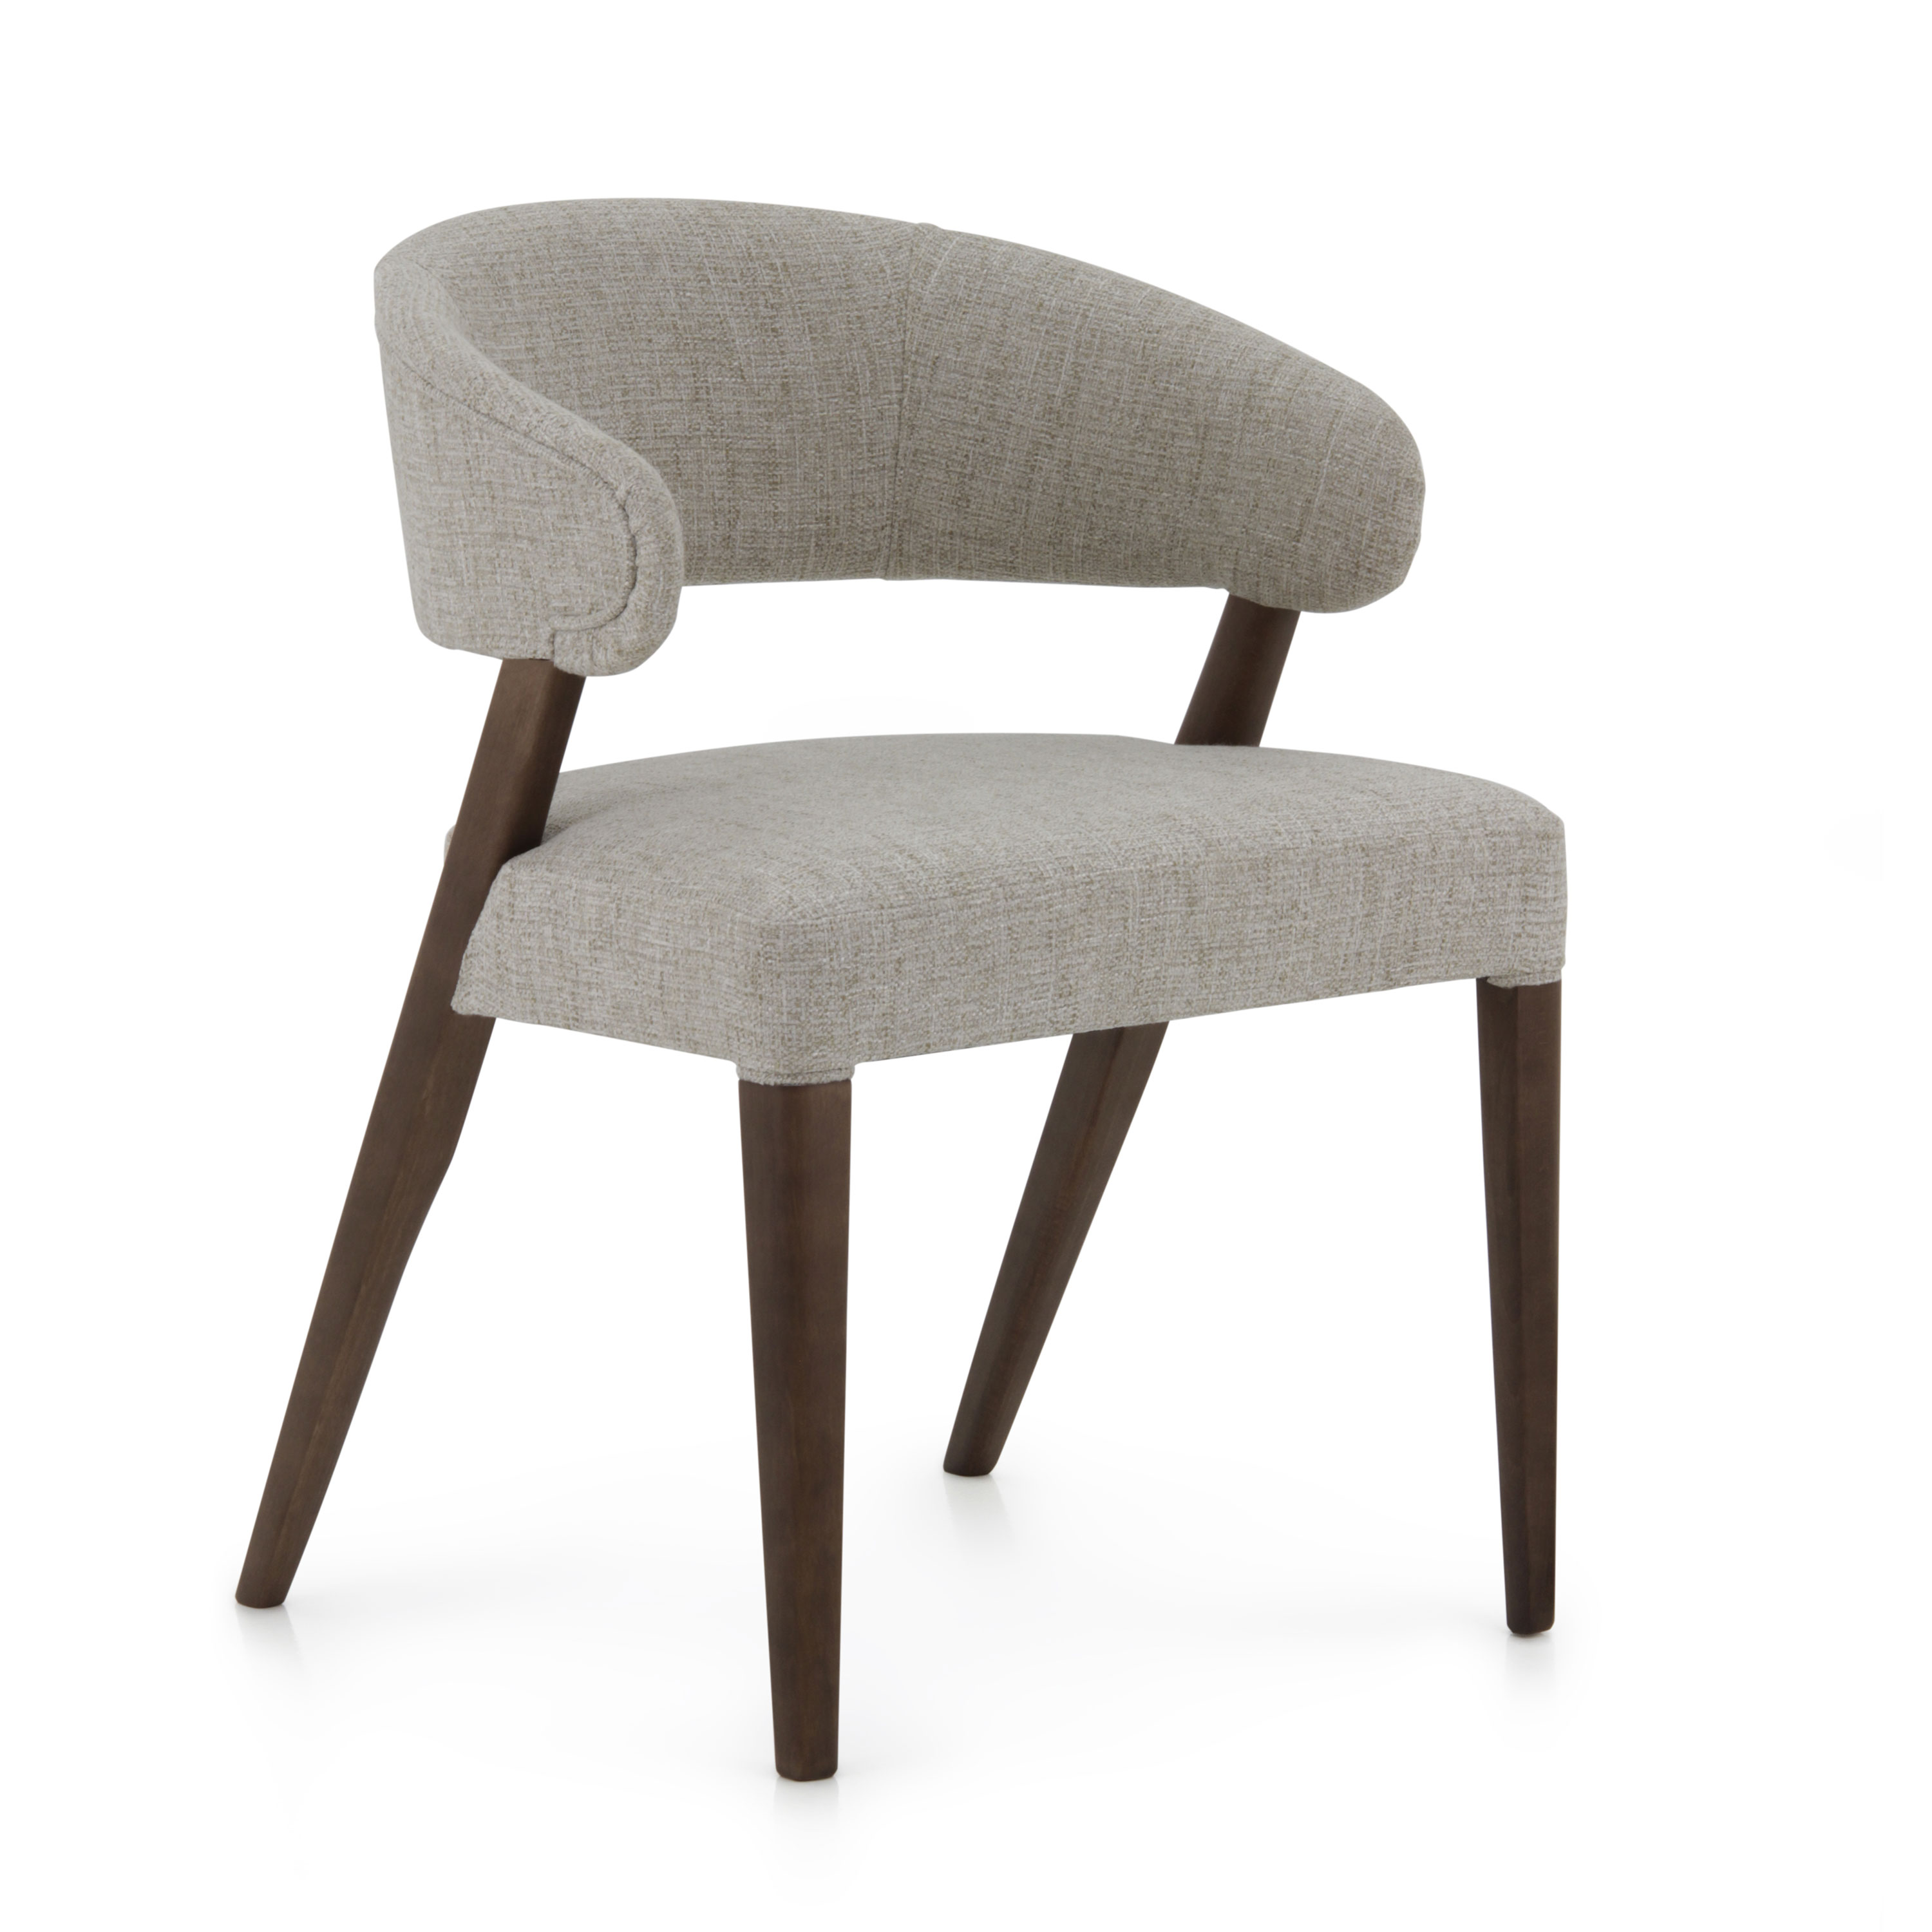 Contemporary Chair with Wood Structure Kisa Sevensedie